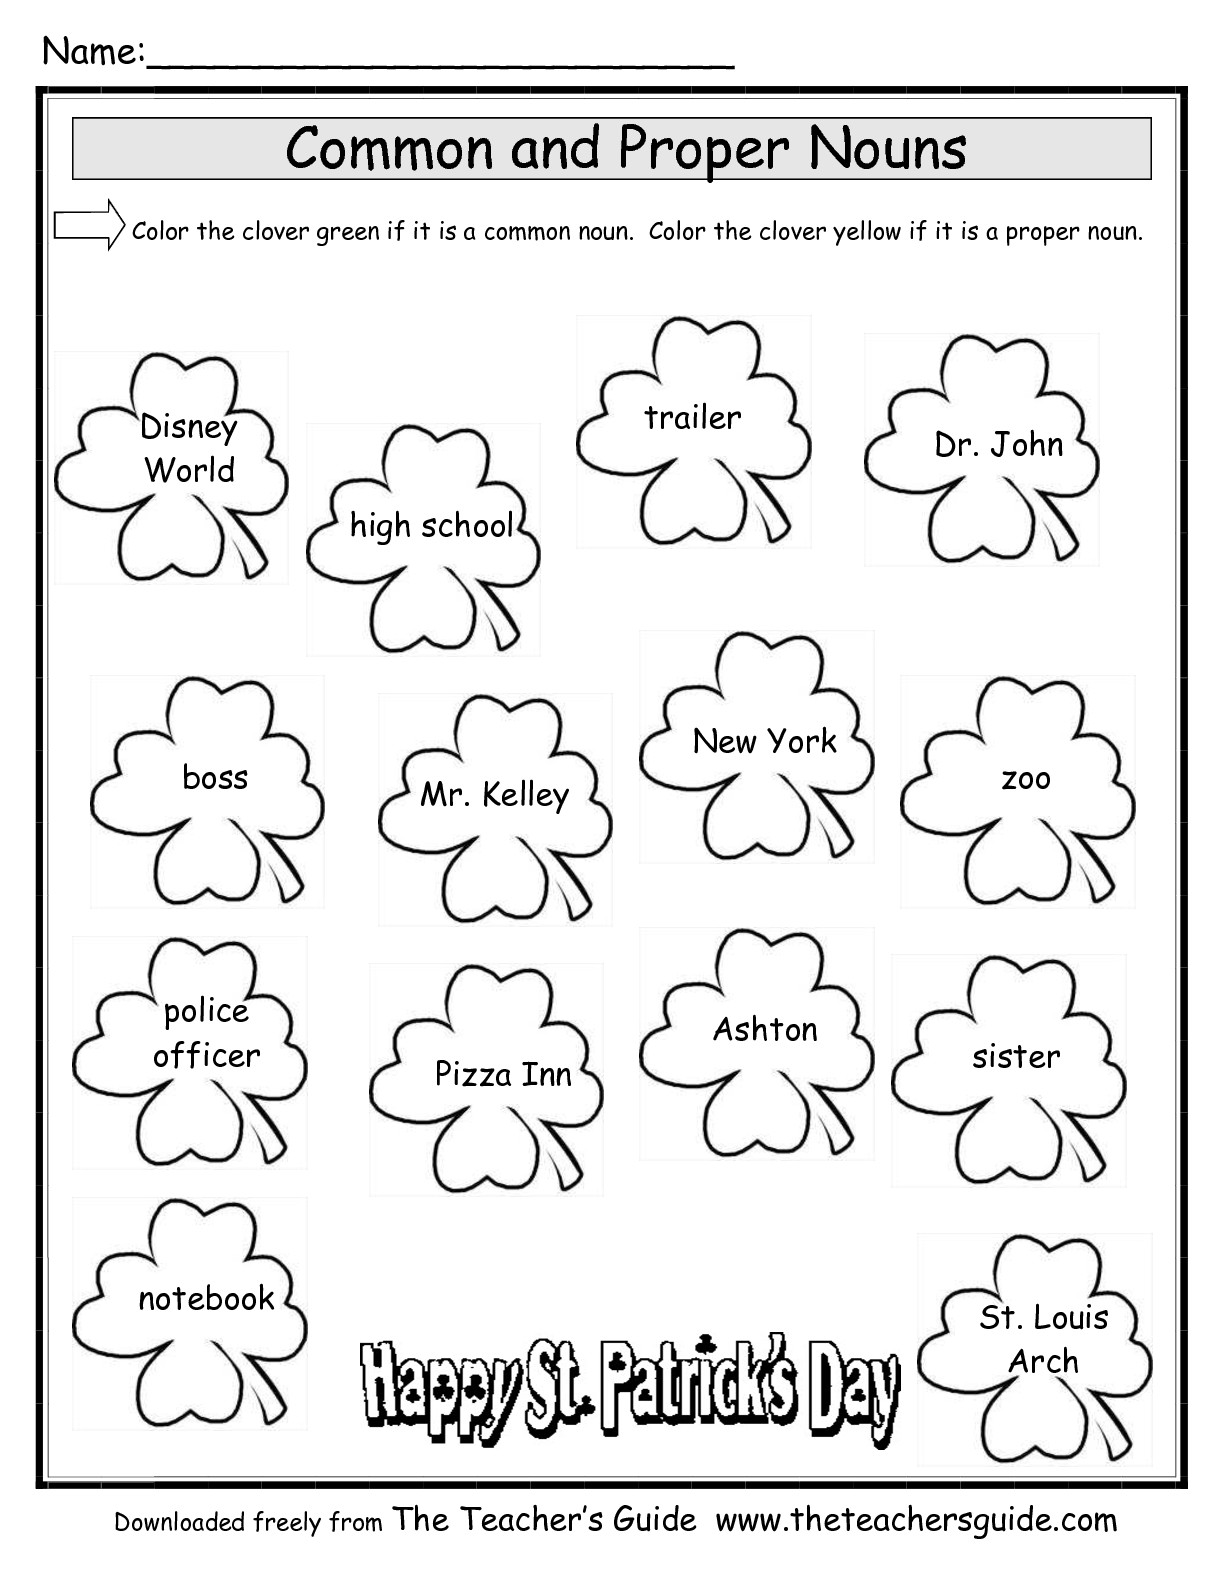 15 Best Images of Noun Coloring Worksheets - Printable ...